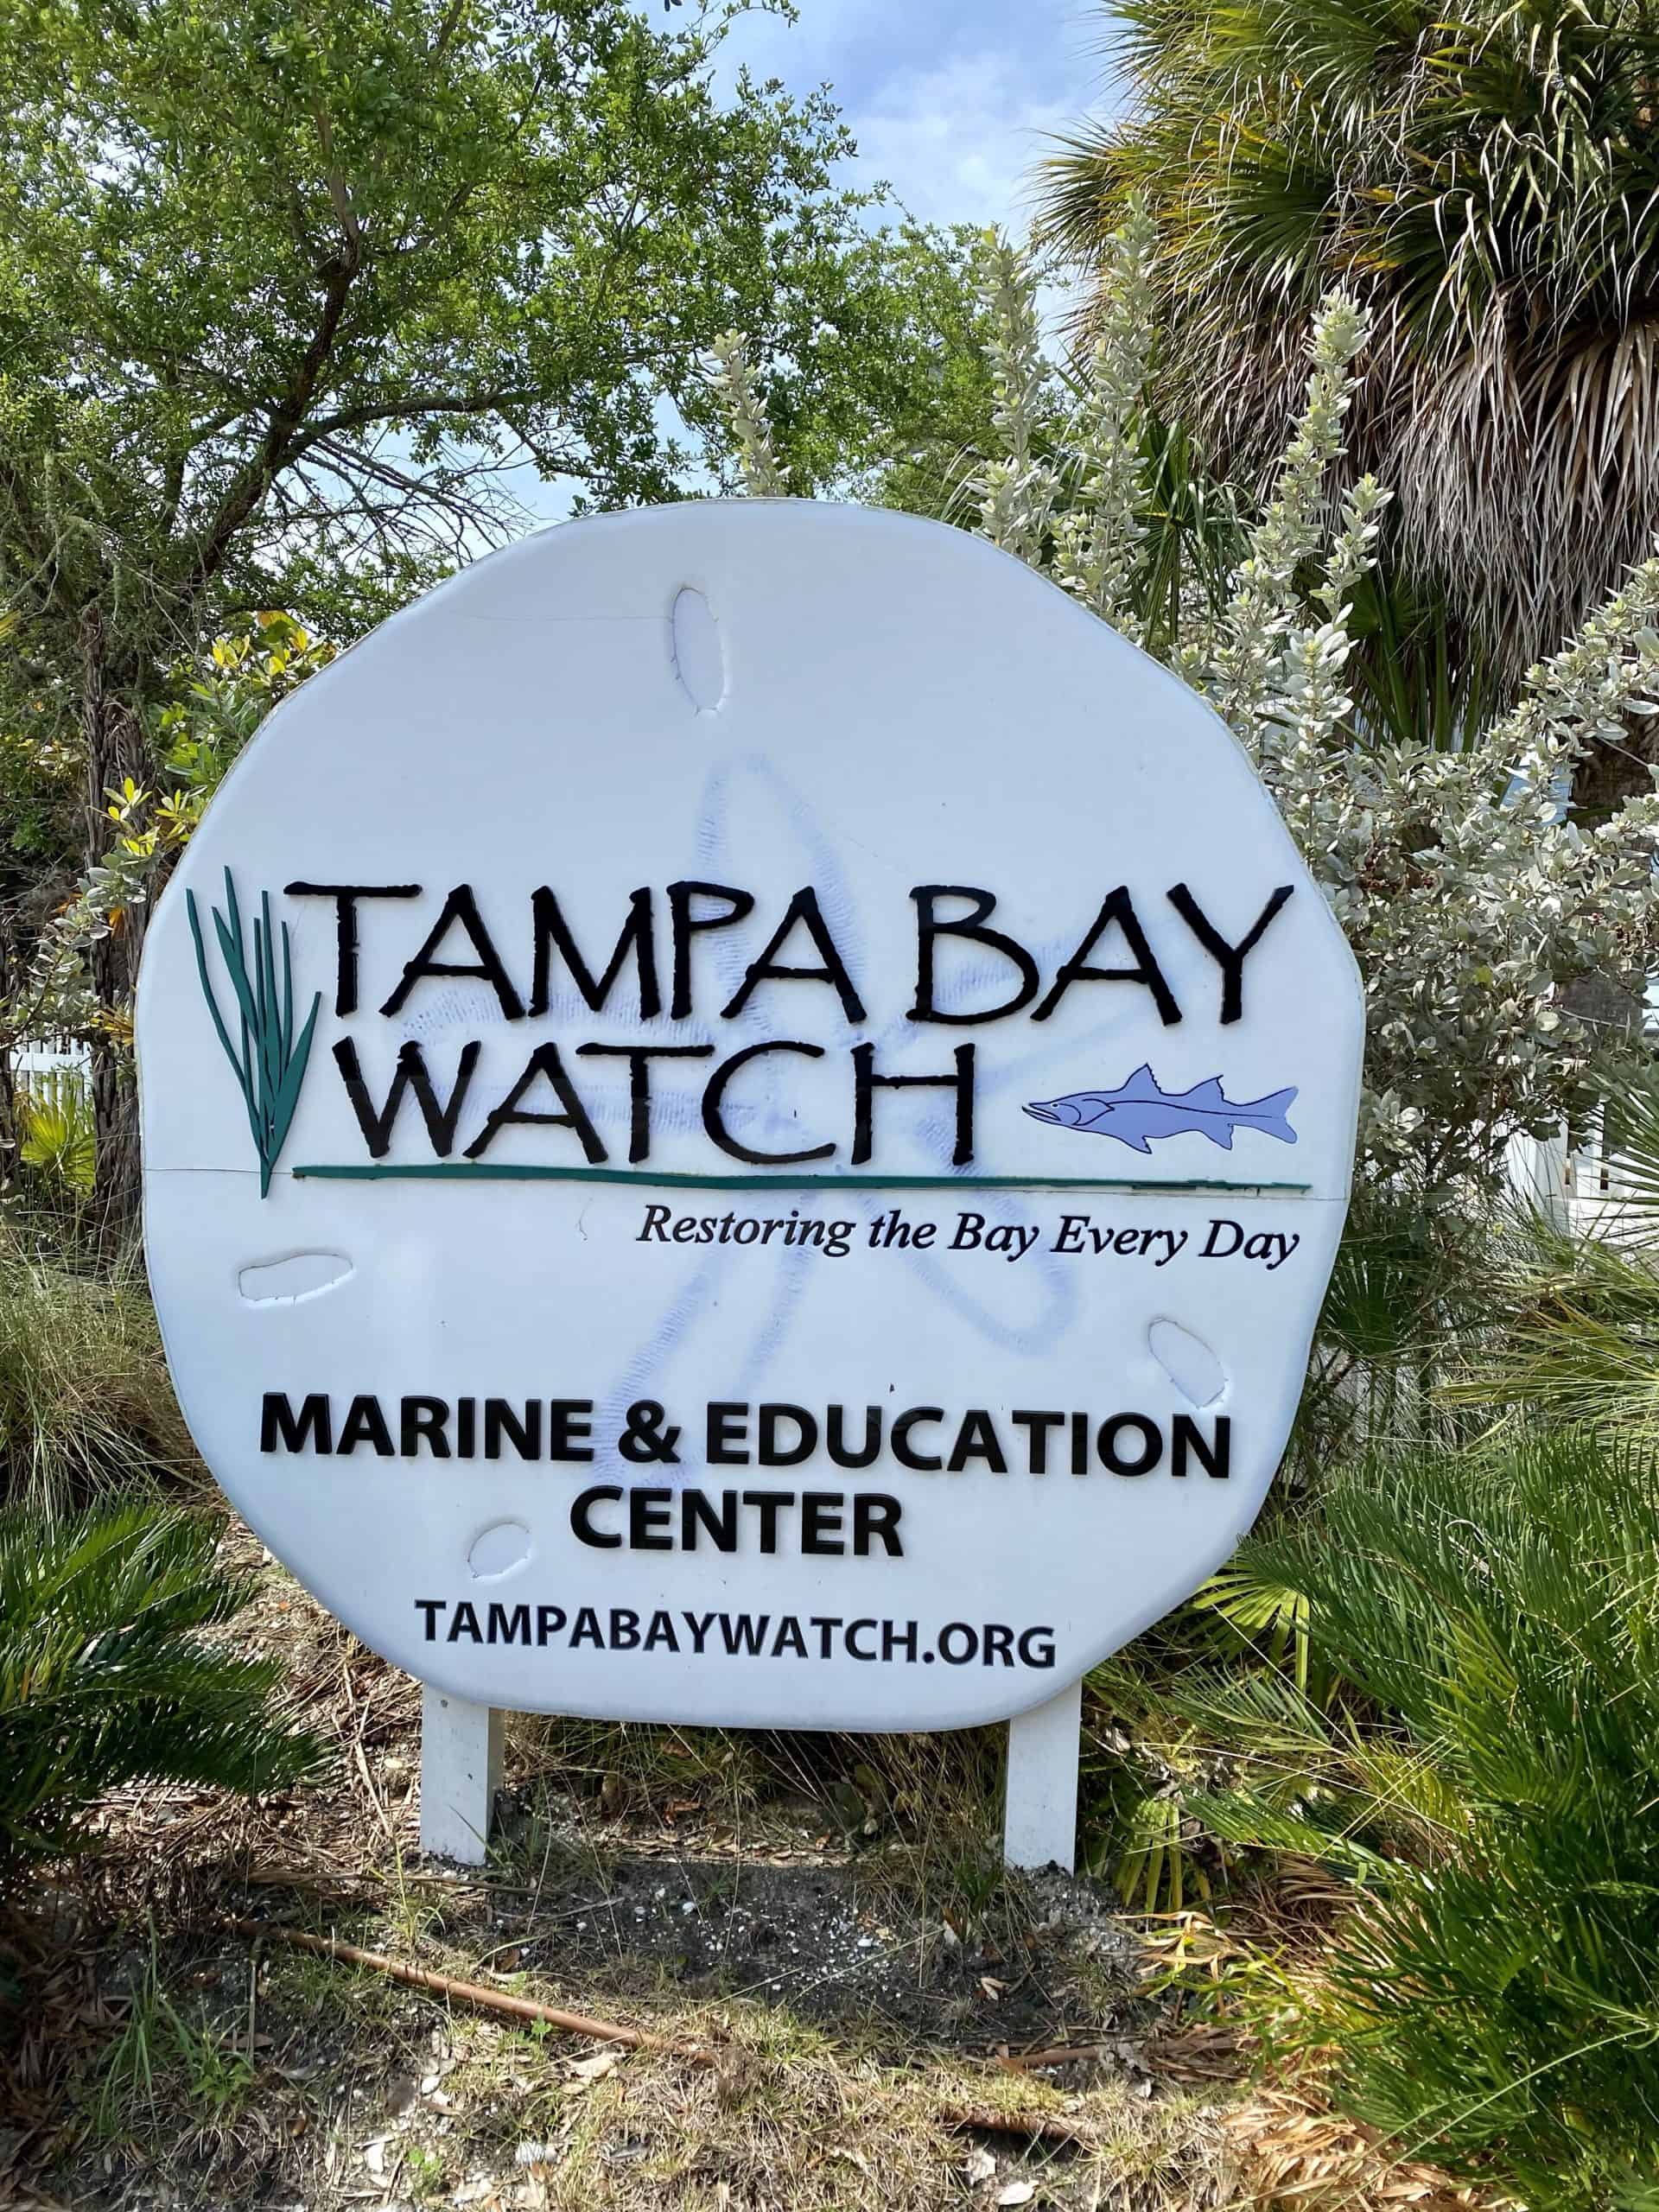 Tampa Bay Watch is located right before the toll road to fort desoto